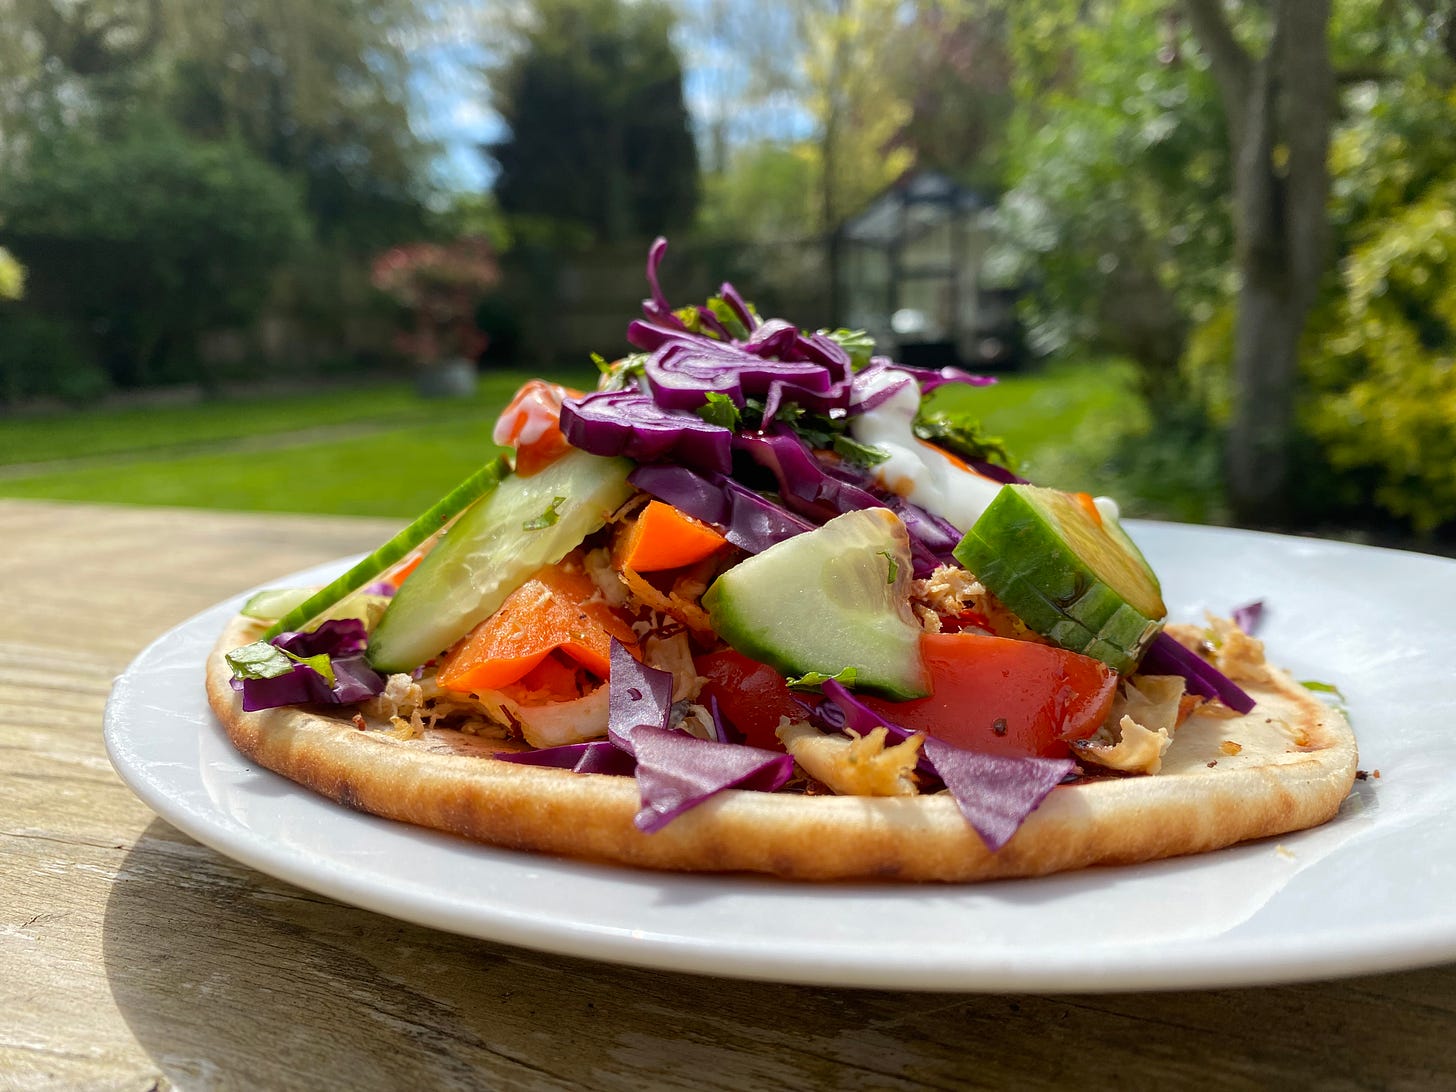 Plate with flatbread topped with cucumber, red cabbage, peppers, and green herbs. The plate is on a table in a garden.